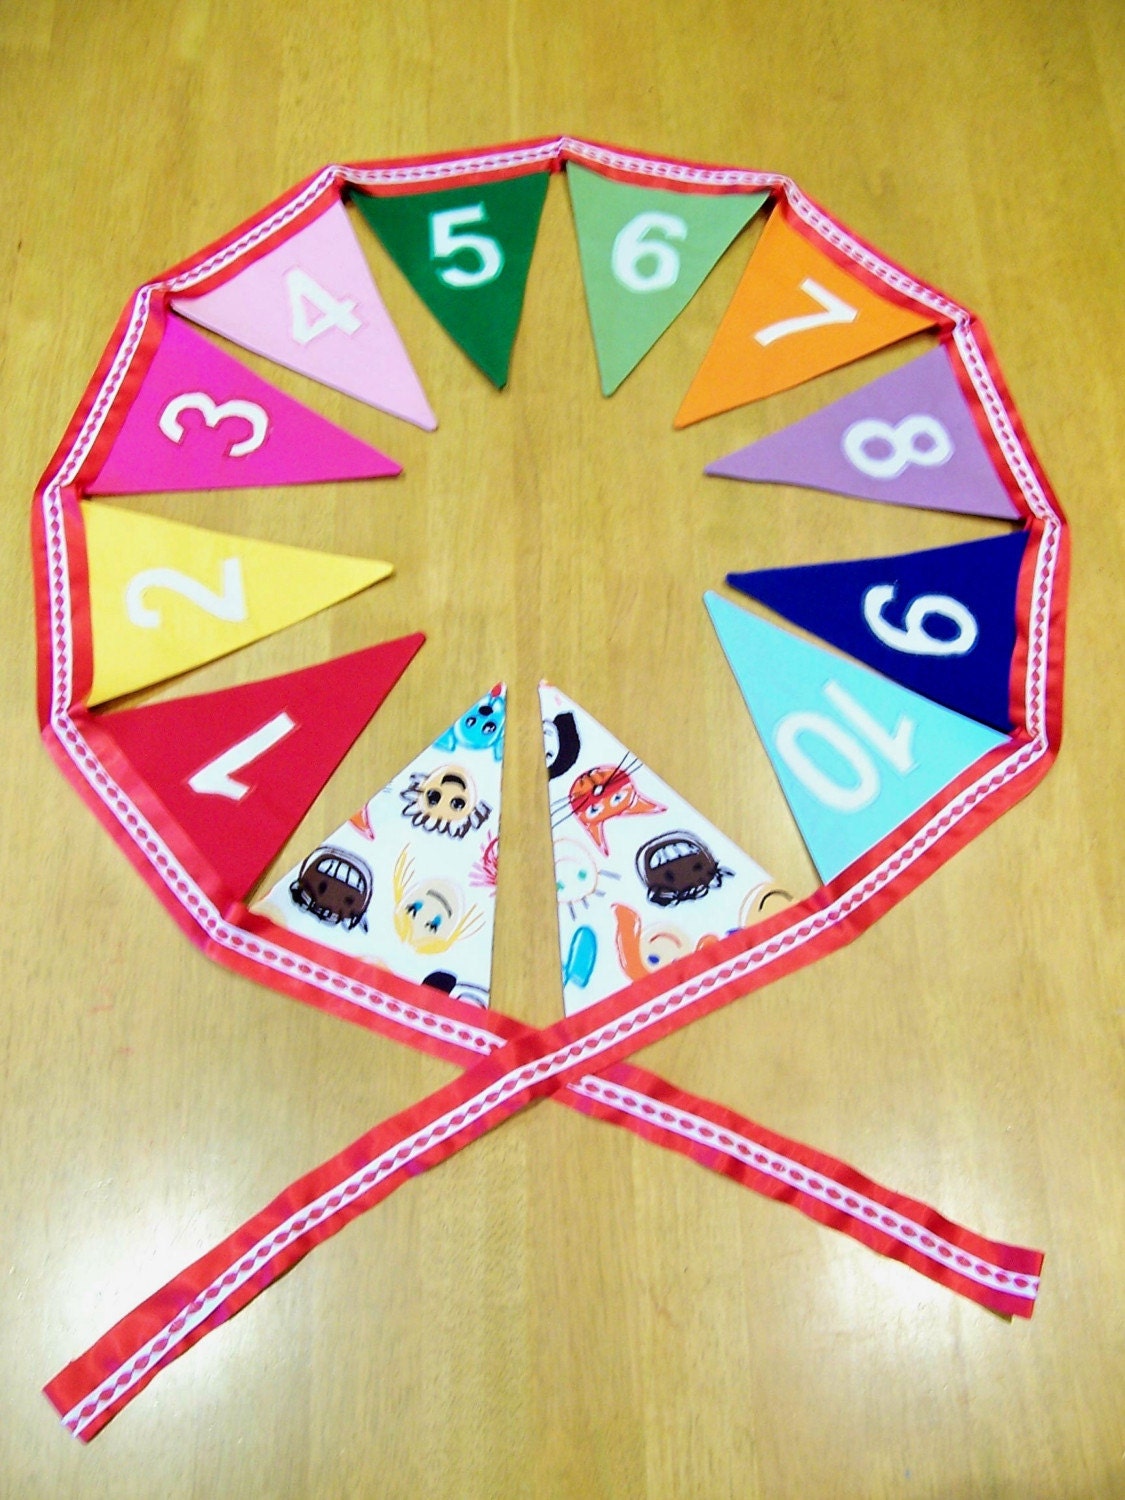 Number Bunting - 1 to 10 in all the Colours of the Rainbow